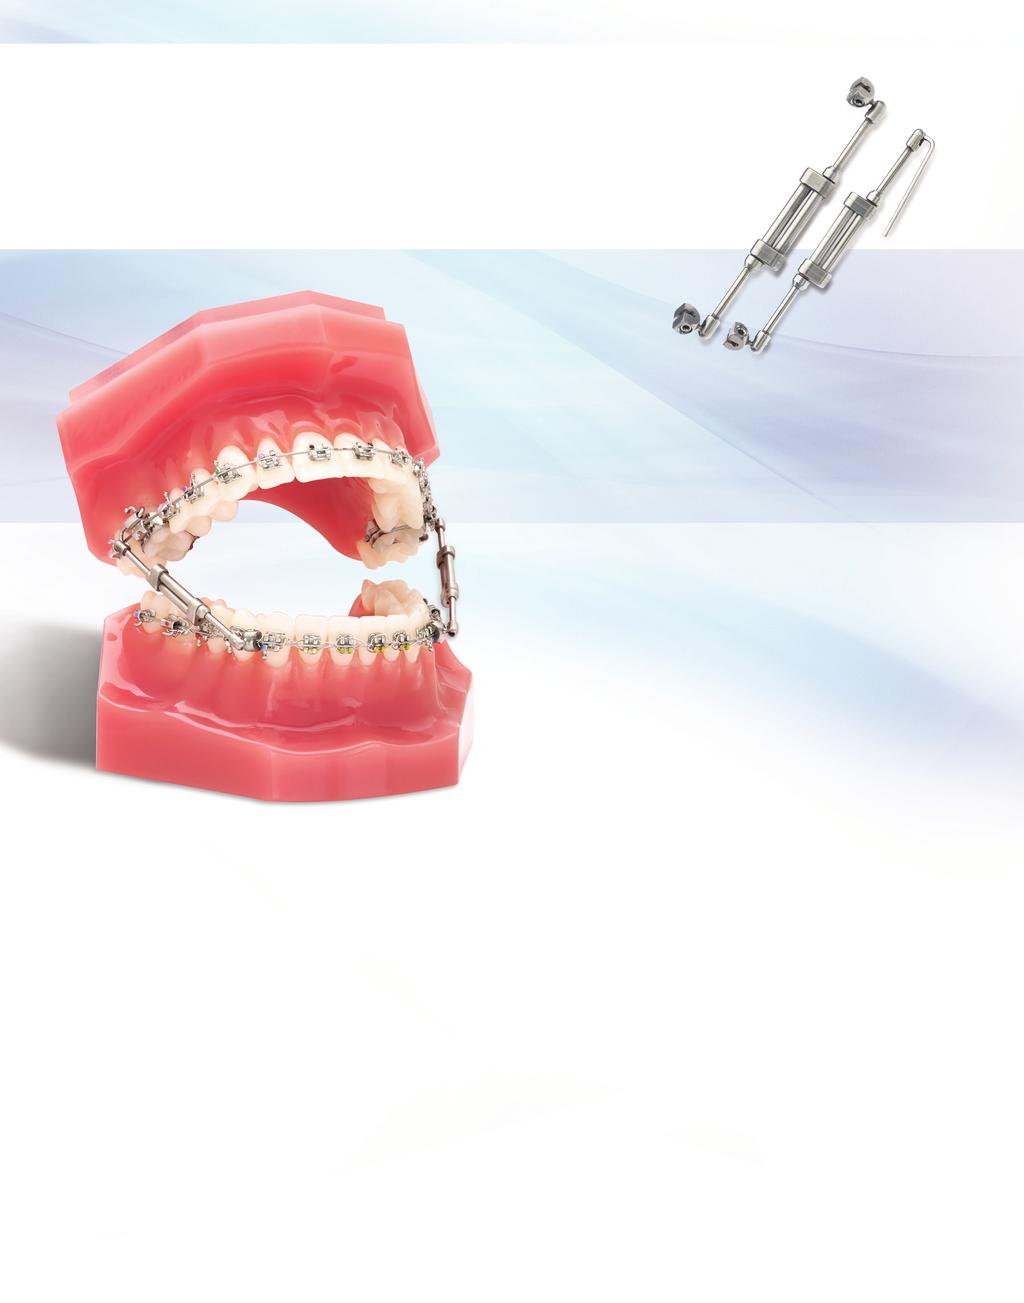 TTCHMENTS TruEase Bite Corrector Devices Innovative Orthodontic Intraoral Devices for the Correction of Class II and Class III